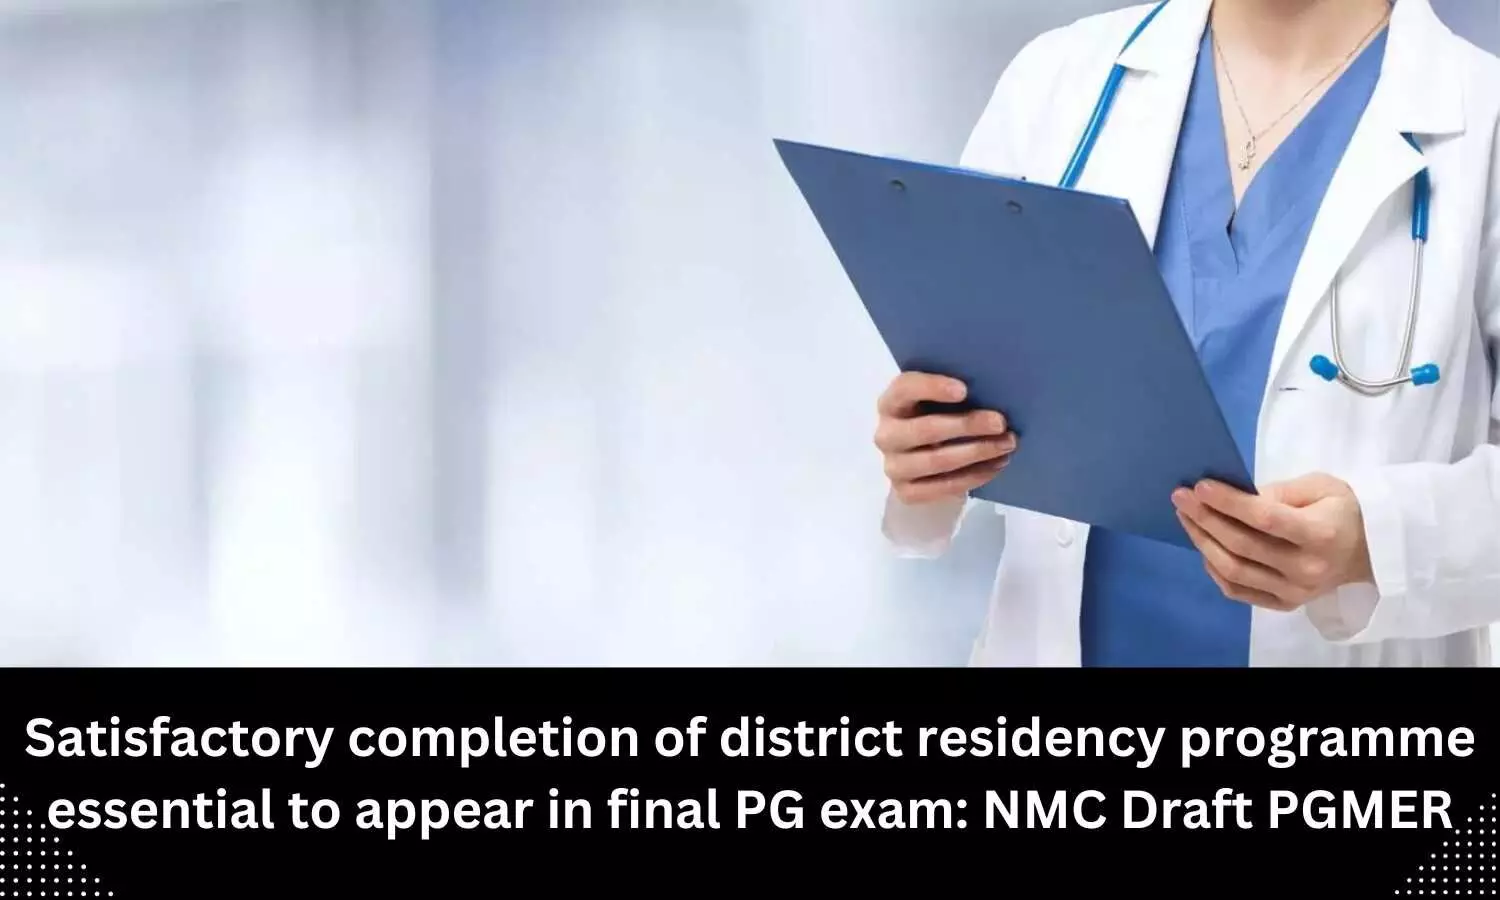 Satisfactory completion of district residency programme essential for PG candidates to appear in final exam: NMC Draft PGMER